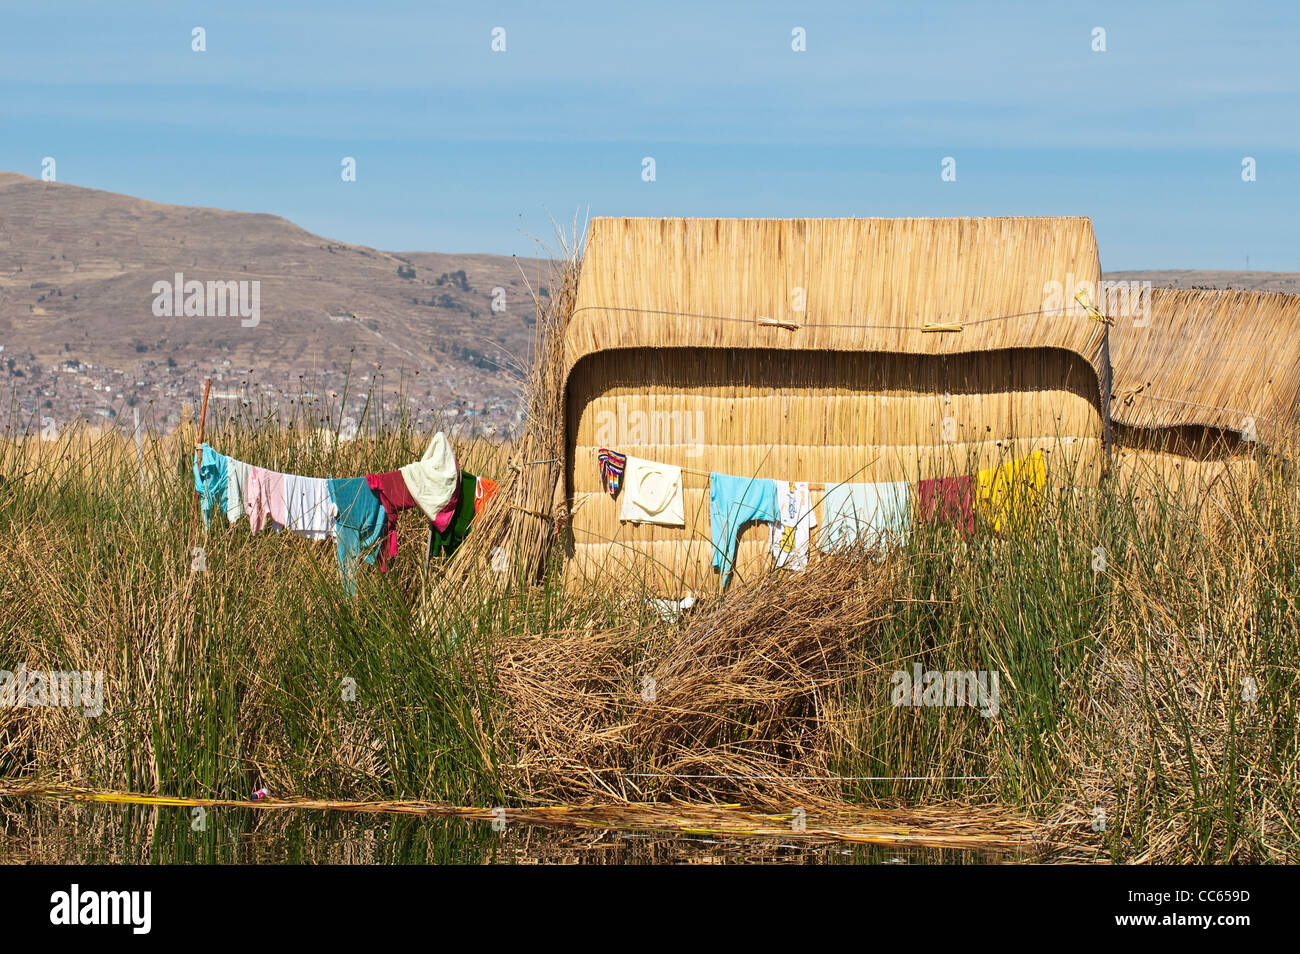 Peru, Lake Titicaca. Quechua or Uros Indian village on the floating Uros Islands. Stock Photo